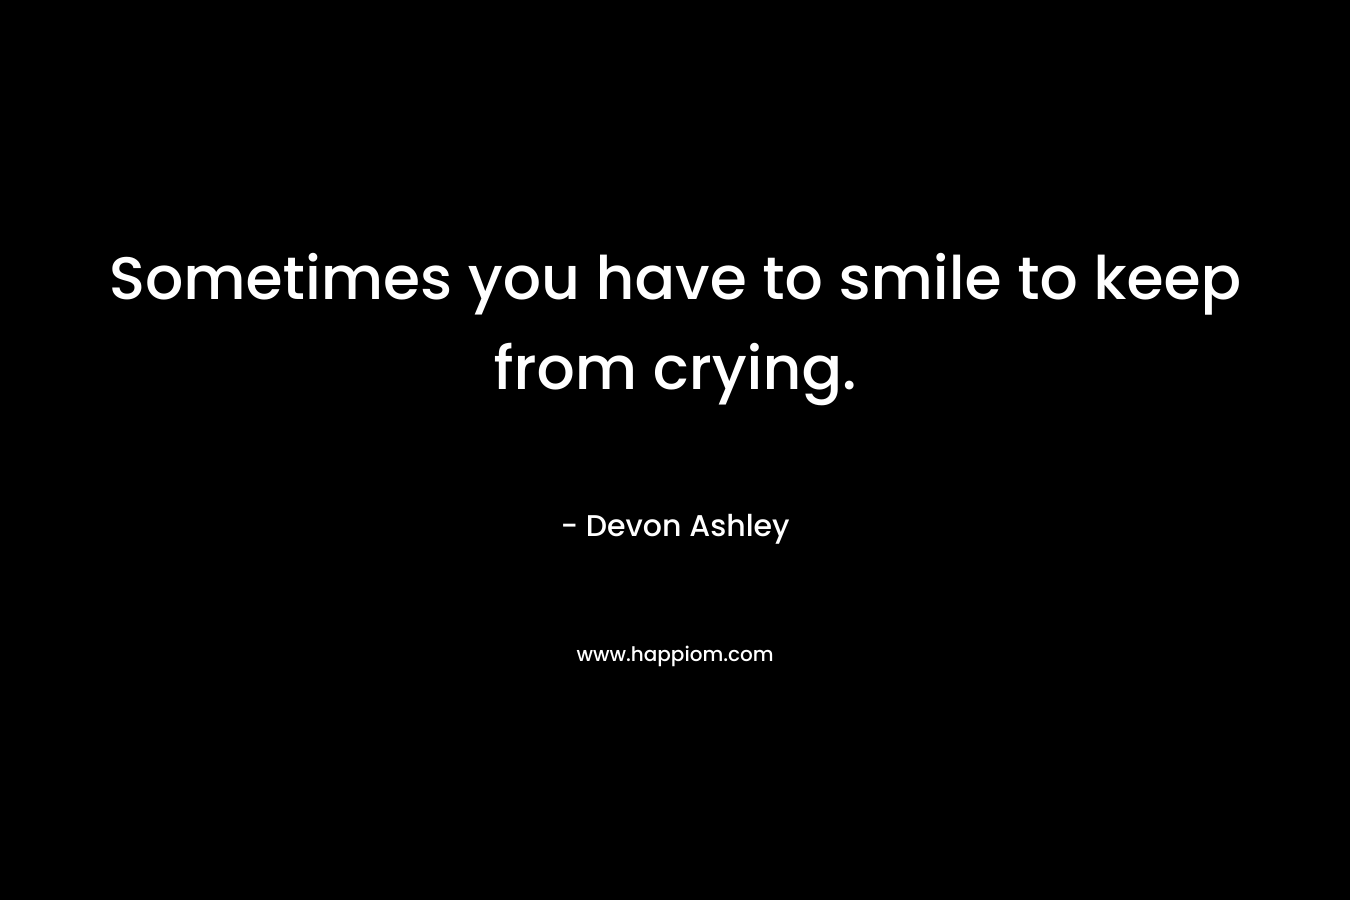 Sometimes you have to smile to keep from crying.